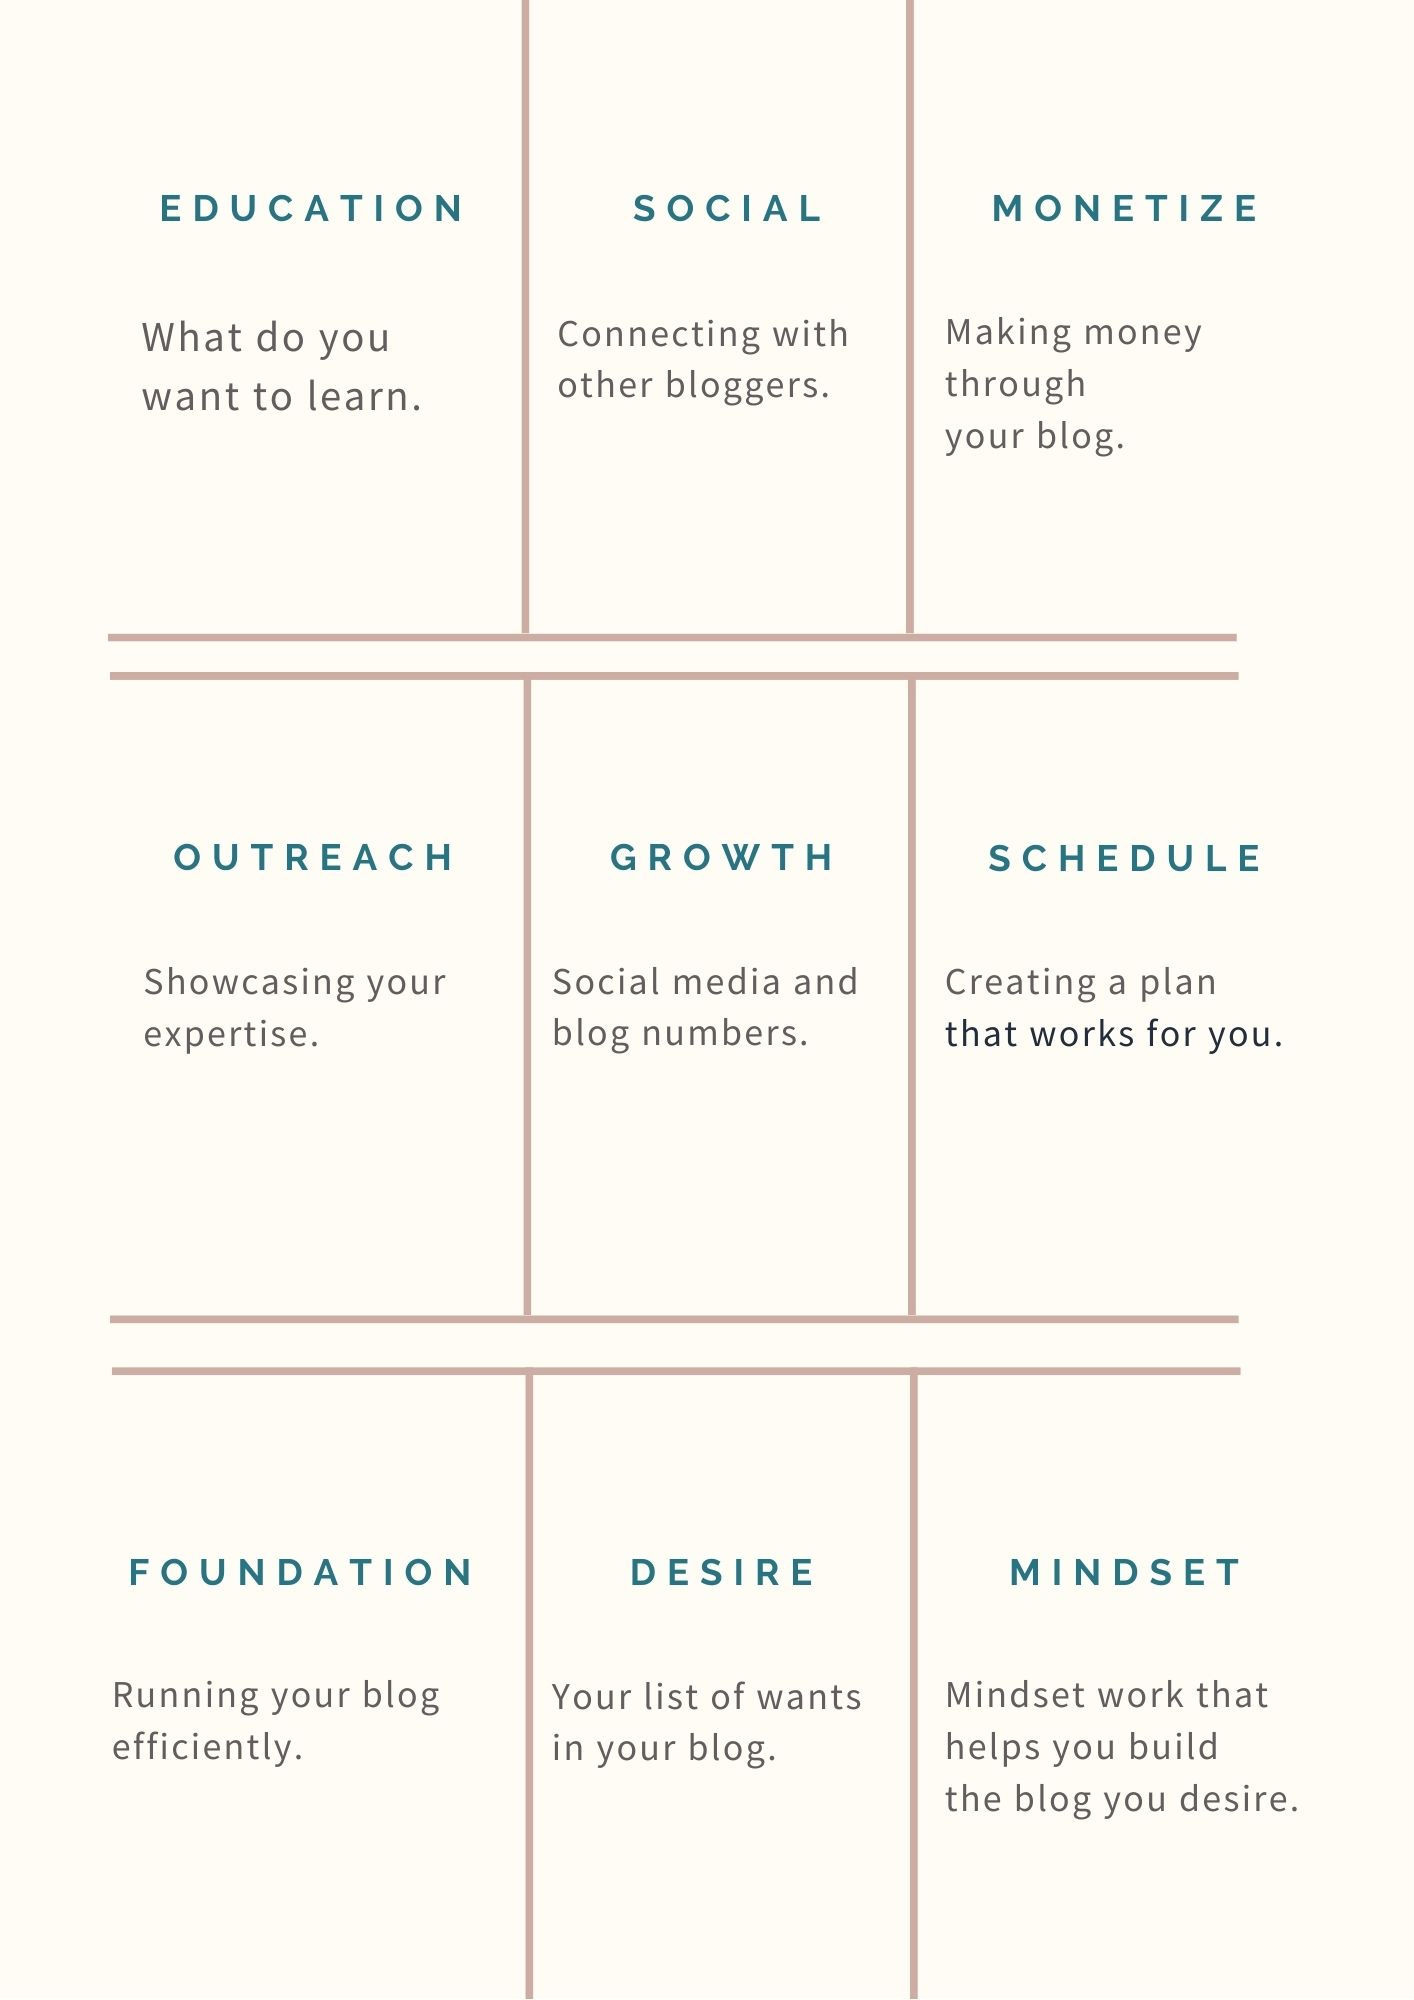 The different categories to use when creating your blogging vision.